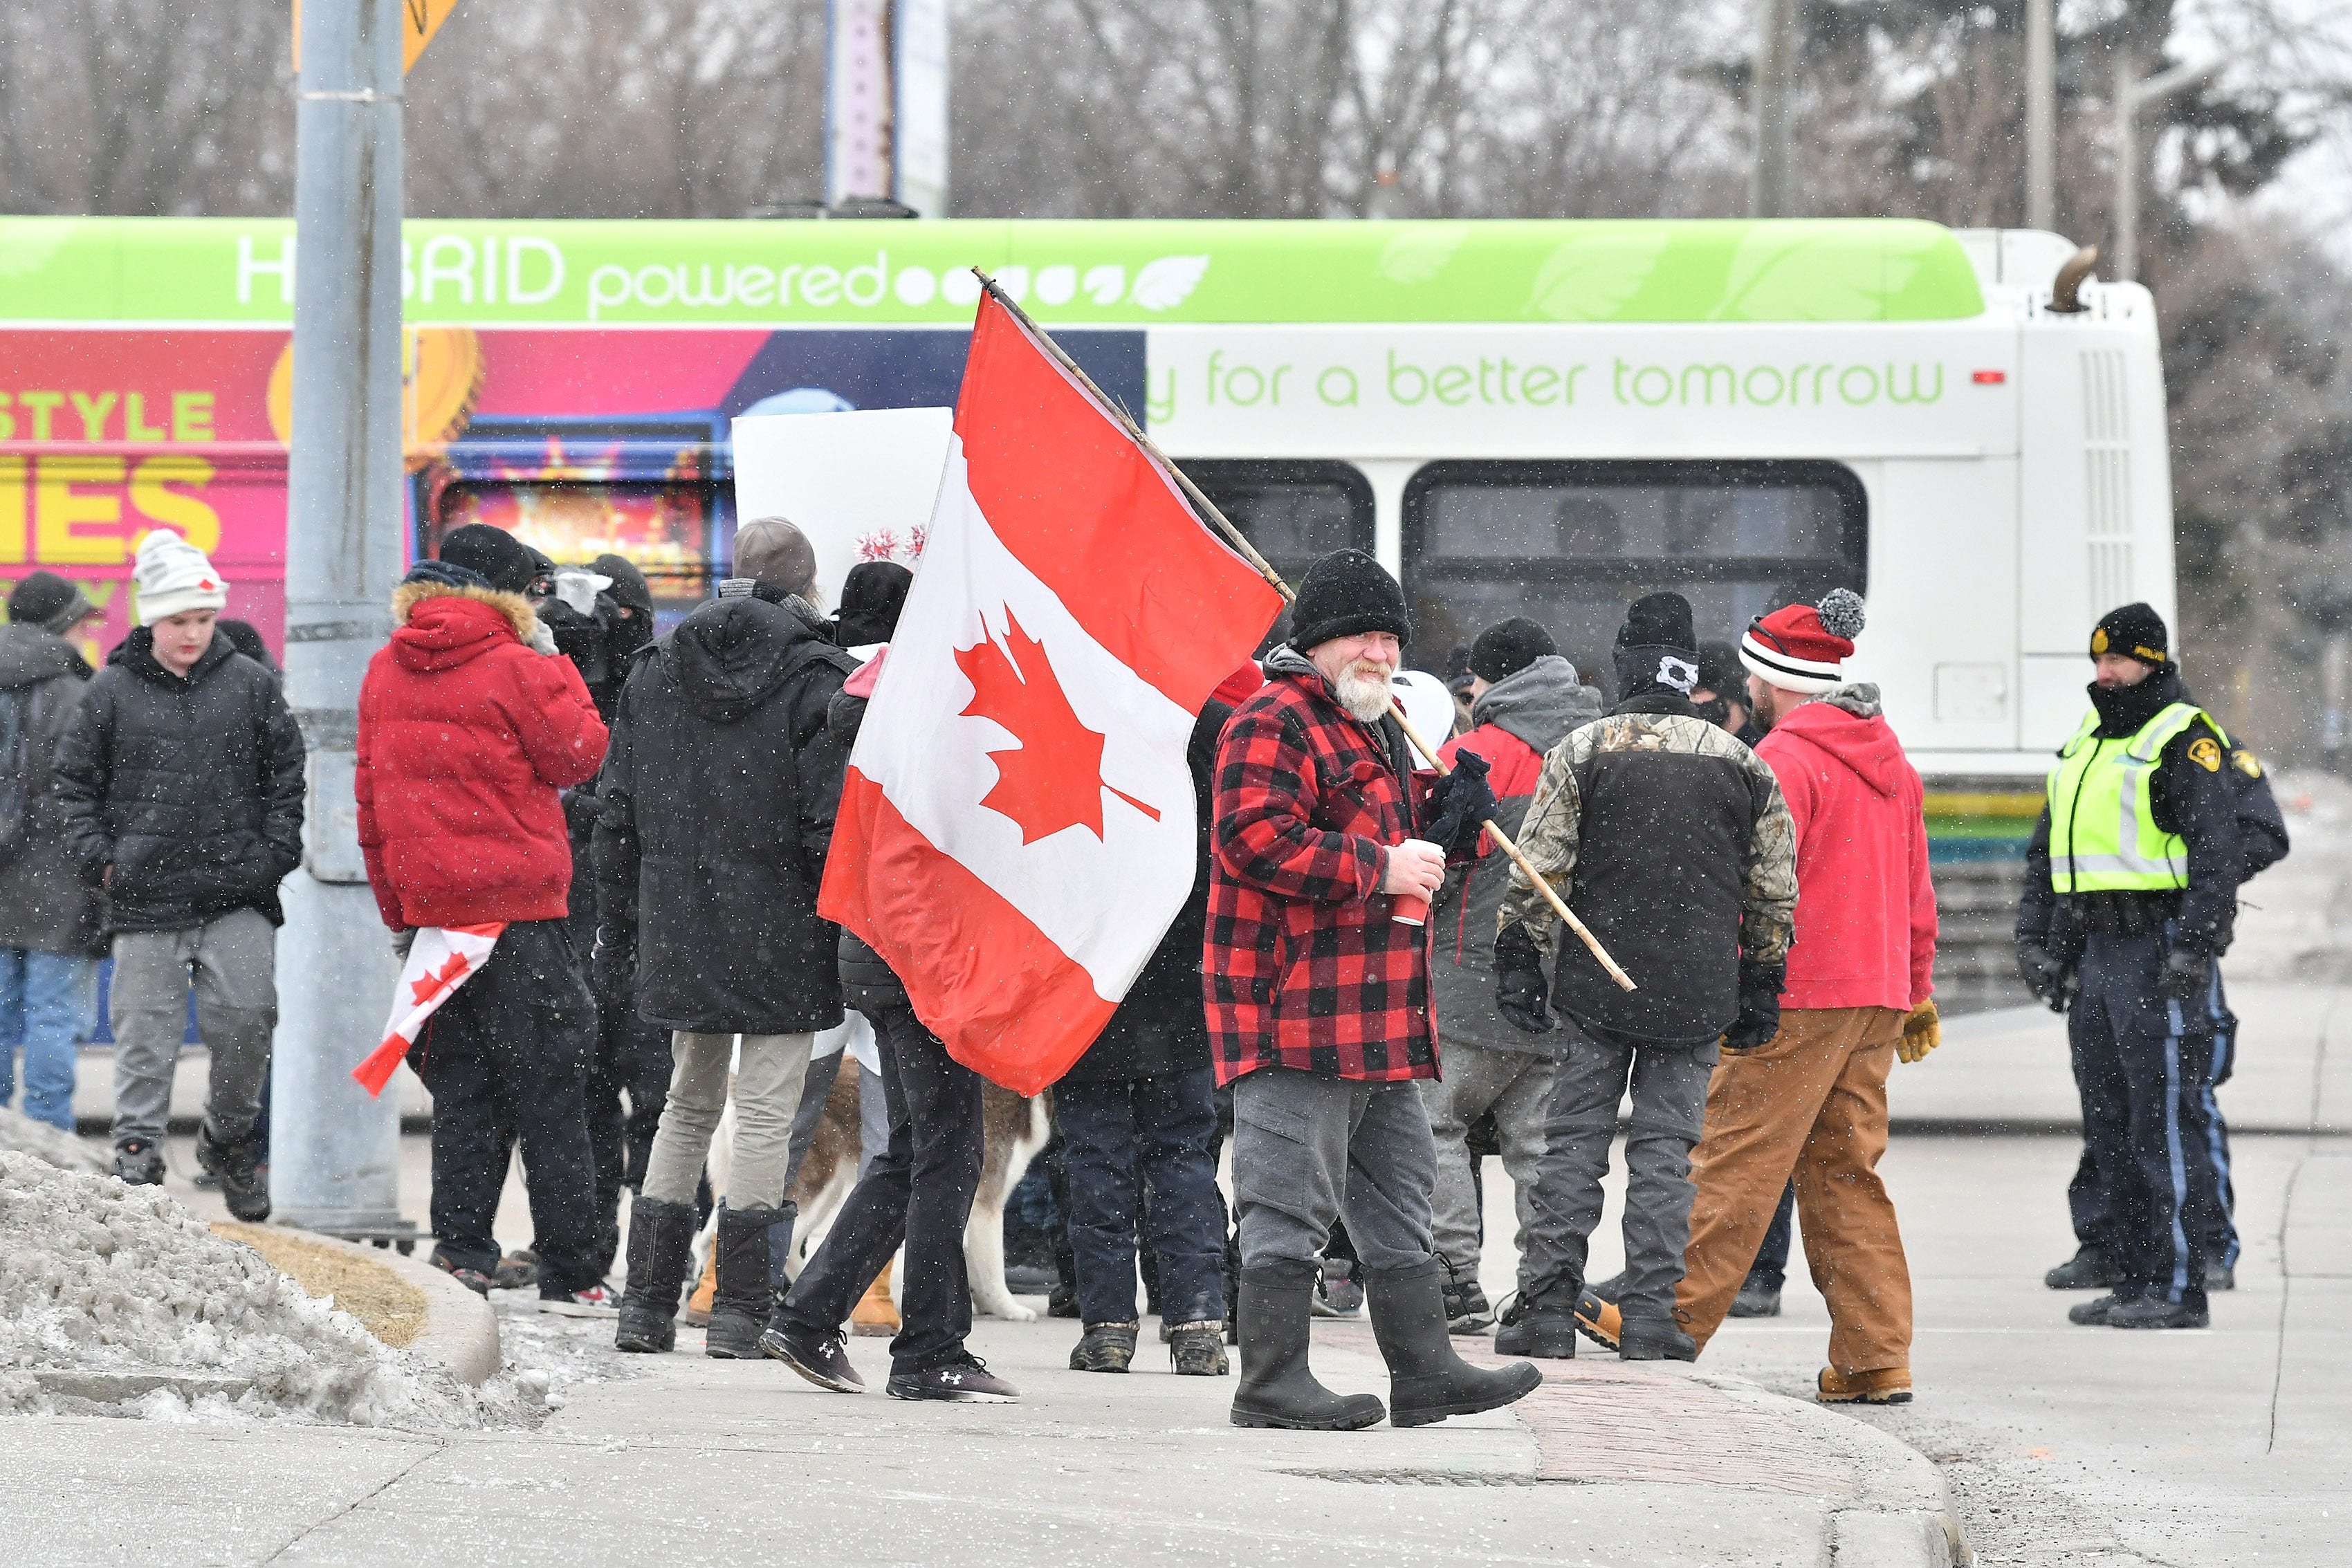 Protesters gather on the sidewalk of Tecumseh Road in view of the combined police presence in Windsor, Ontario, on Feb. 13, 2022.  The city bus in the background was used to transport police officers.
(Robin Buckson / The Detroit News)